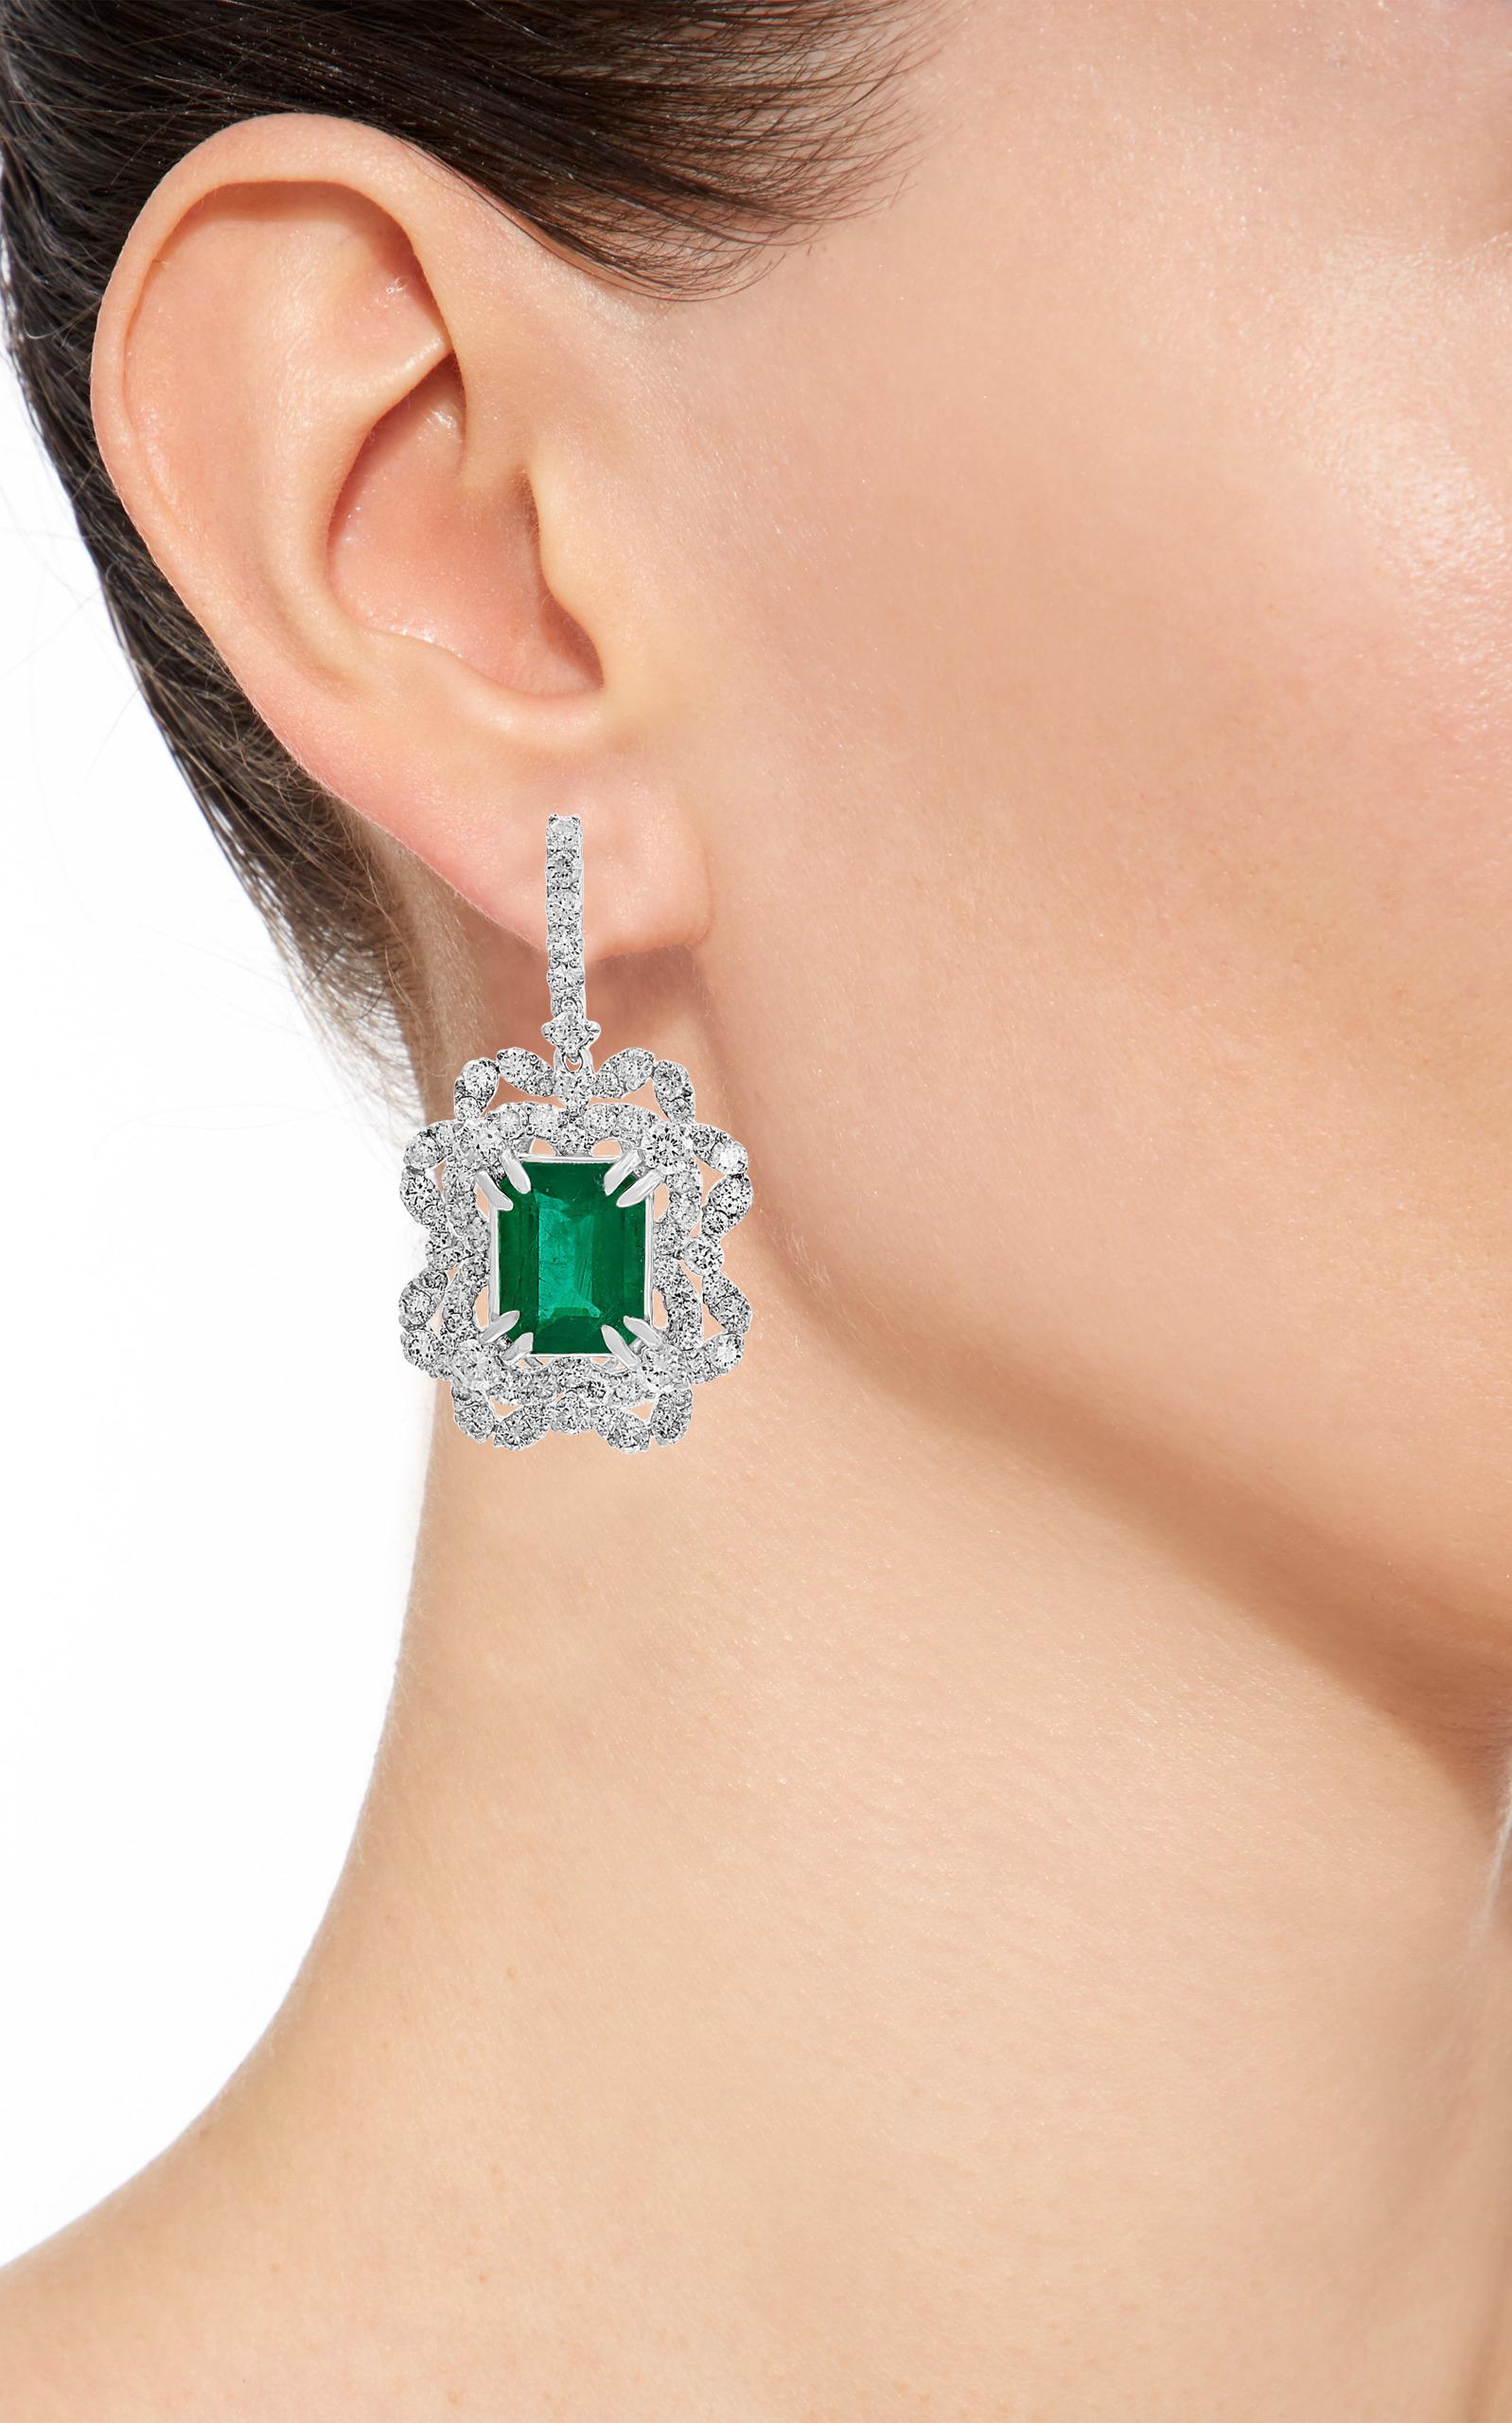 7 Carat Colombian Emerald Cut Emerald Diamond Hanging/Drop Earrings 18Karat Gold In New Condition For Sale In New York, NY